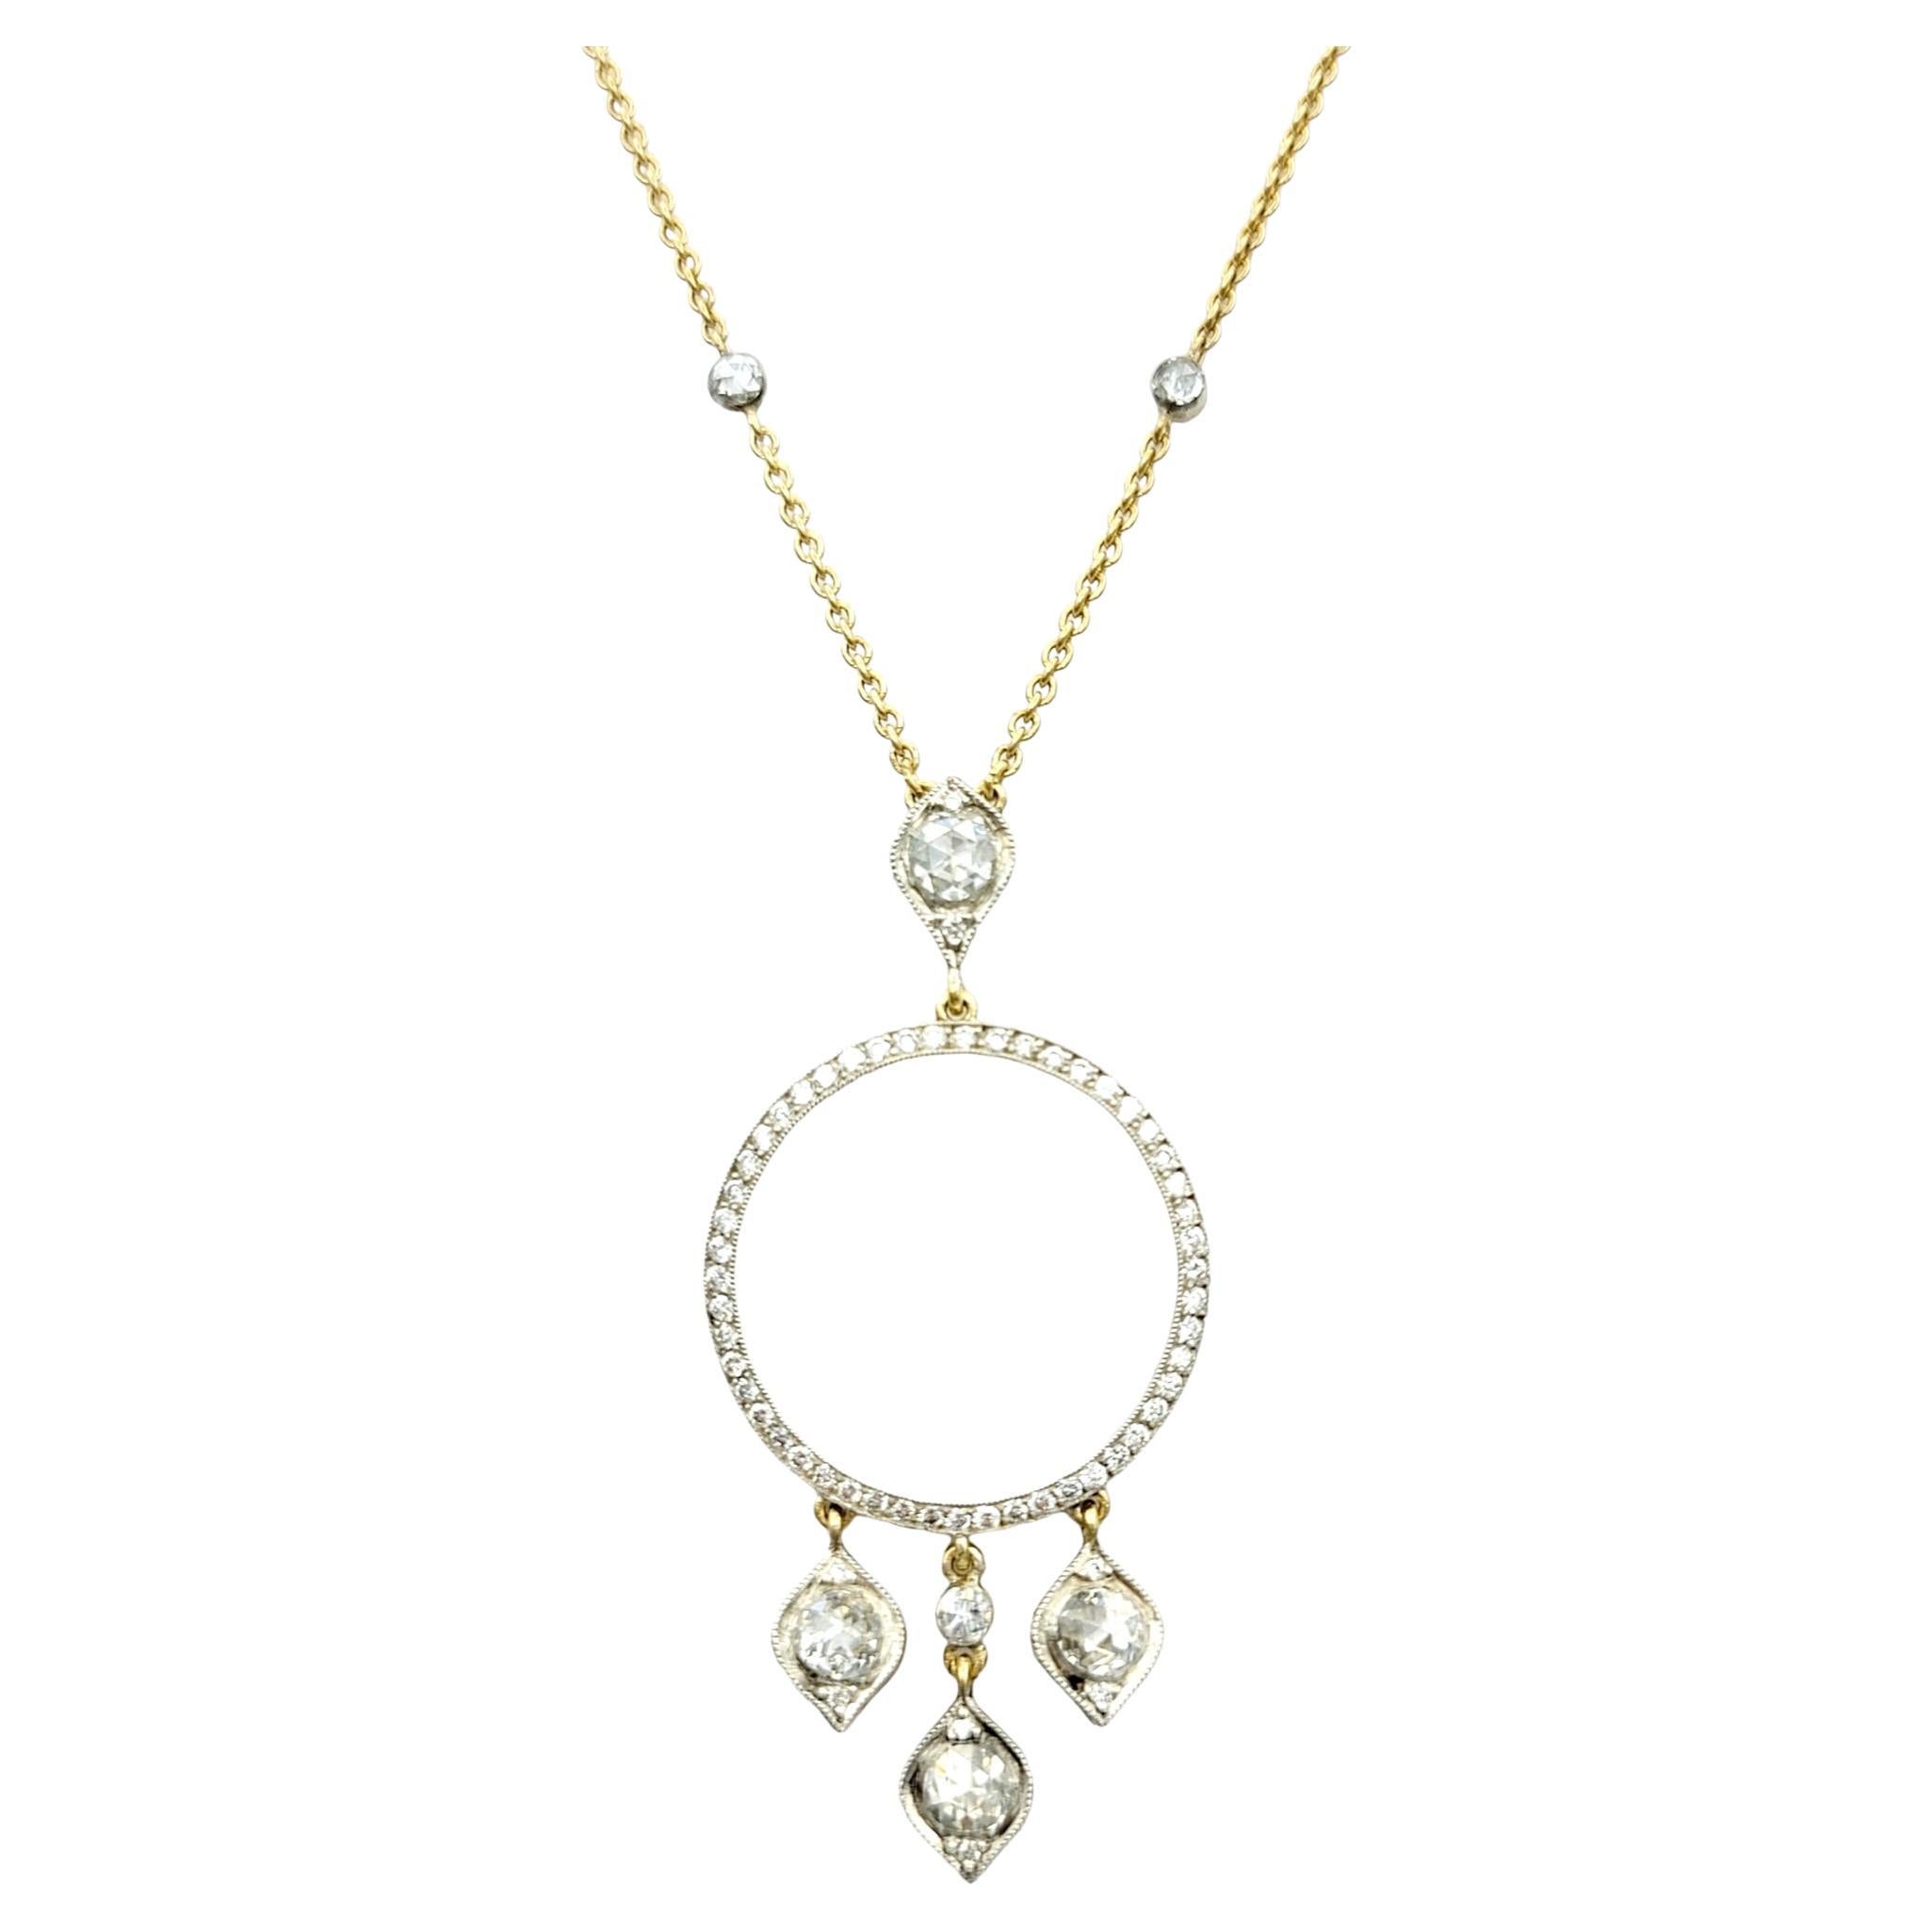 This captivating necklace, created by Gilan, is set in exquisite 14 karat yellow gold and is a beautiful embodiment of elegance and luxury. Its centerpiece is a stationary pendant showcasing a large open circle, encrusted with a mesmerizing array of